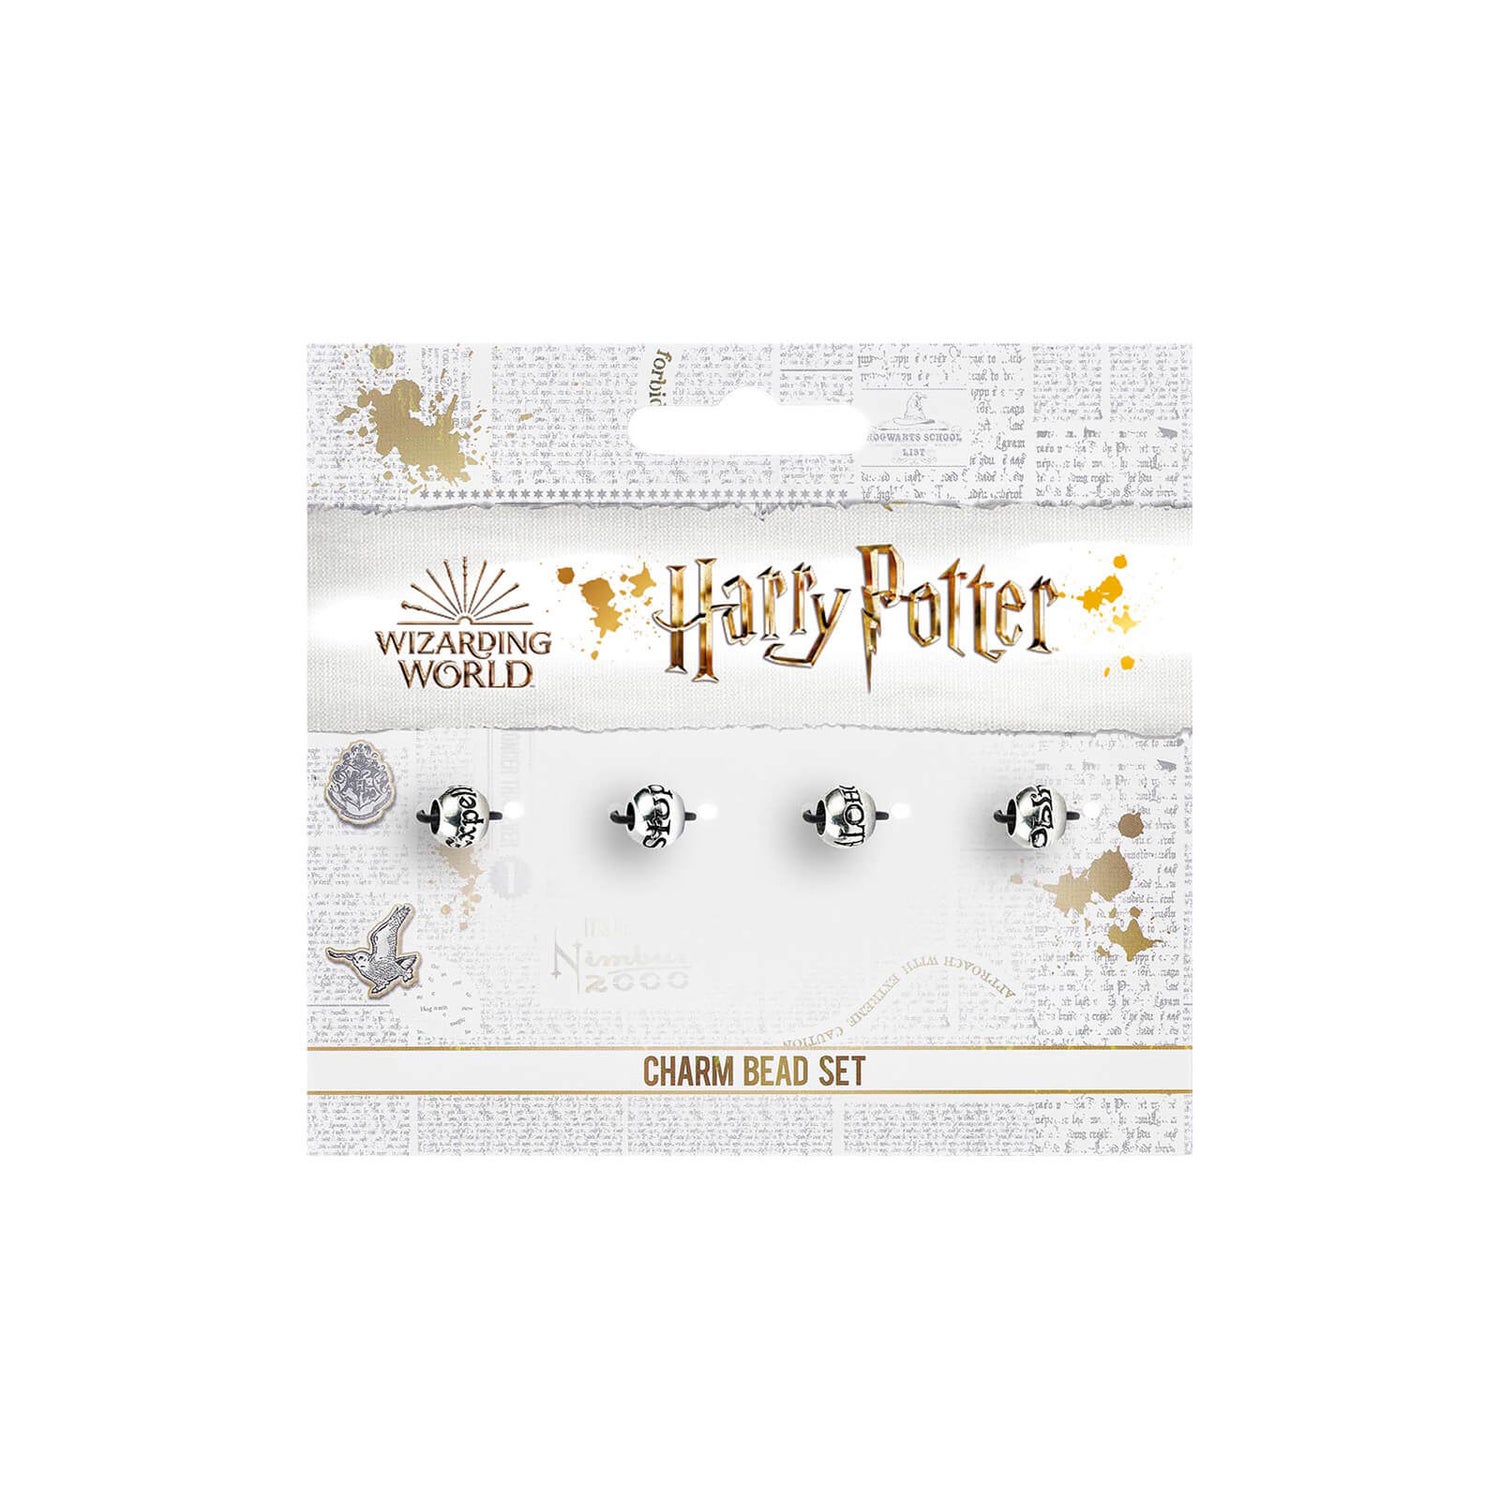 Harry Potter Charm Bead Set of 4 Spell Beads - Silver